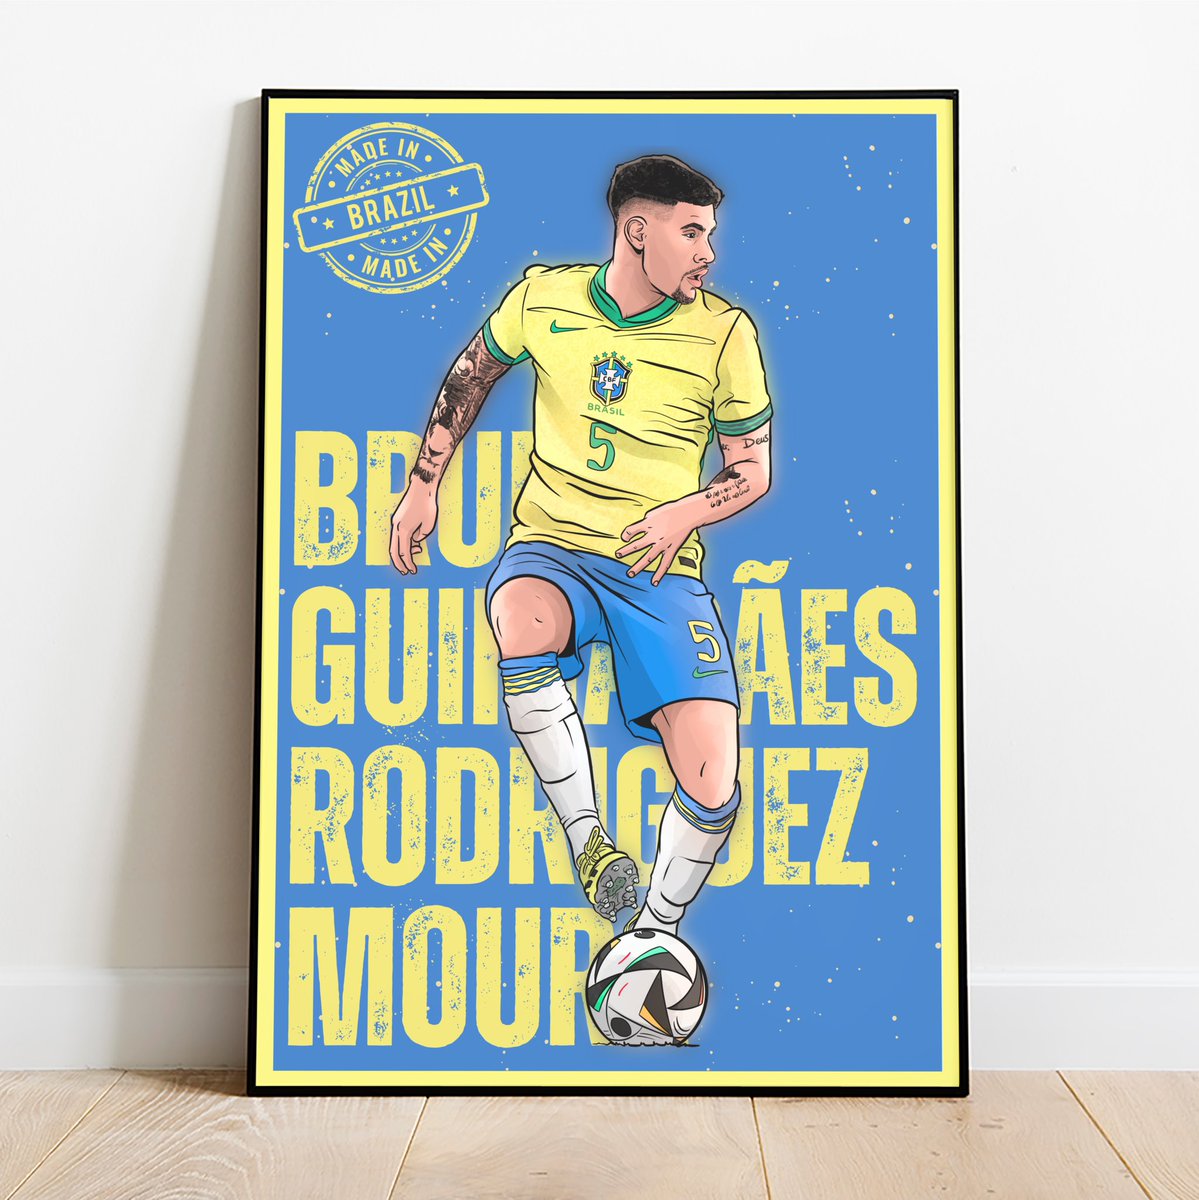 A final illustration for today…

Bruno Guimarães Rodriguez Moura…

Or “WOR BRUNO” if you’re from the North East, as always, please hit RT 🔥👀🍻

Limited Edition Prints now available in the shop, this time, in his Brazilian Colours ahead of the Copa America this summer #Brasil